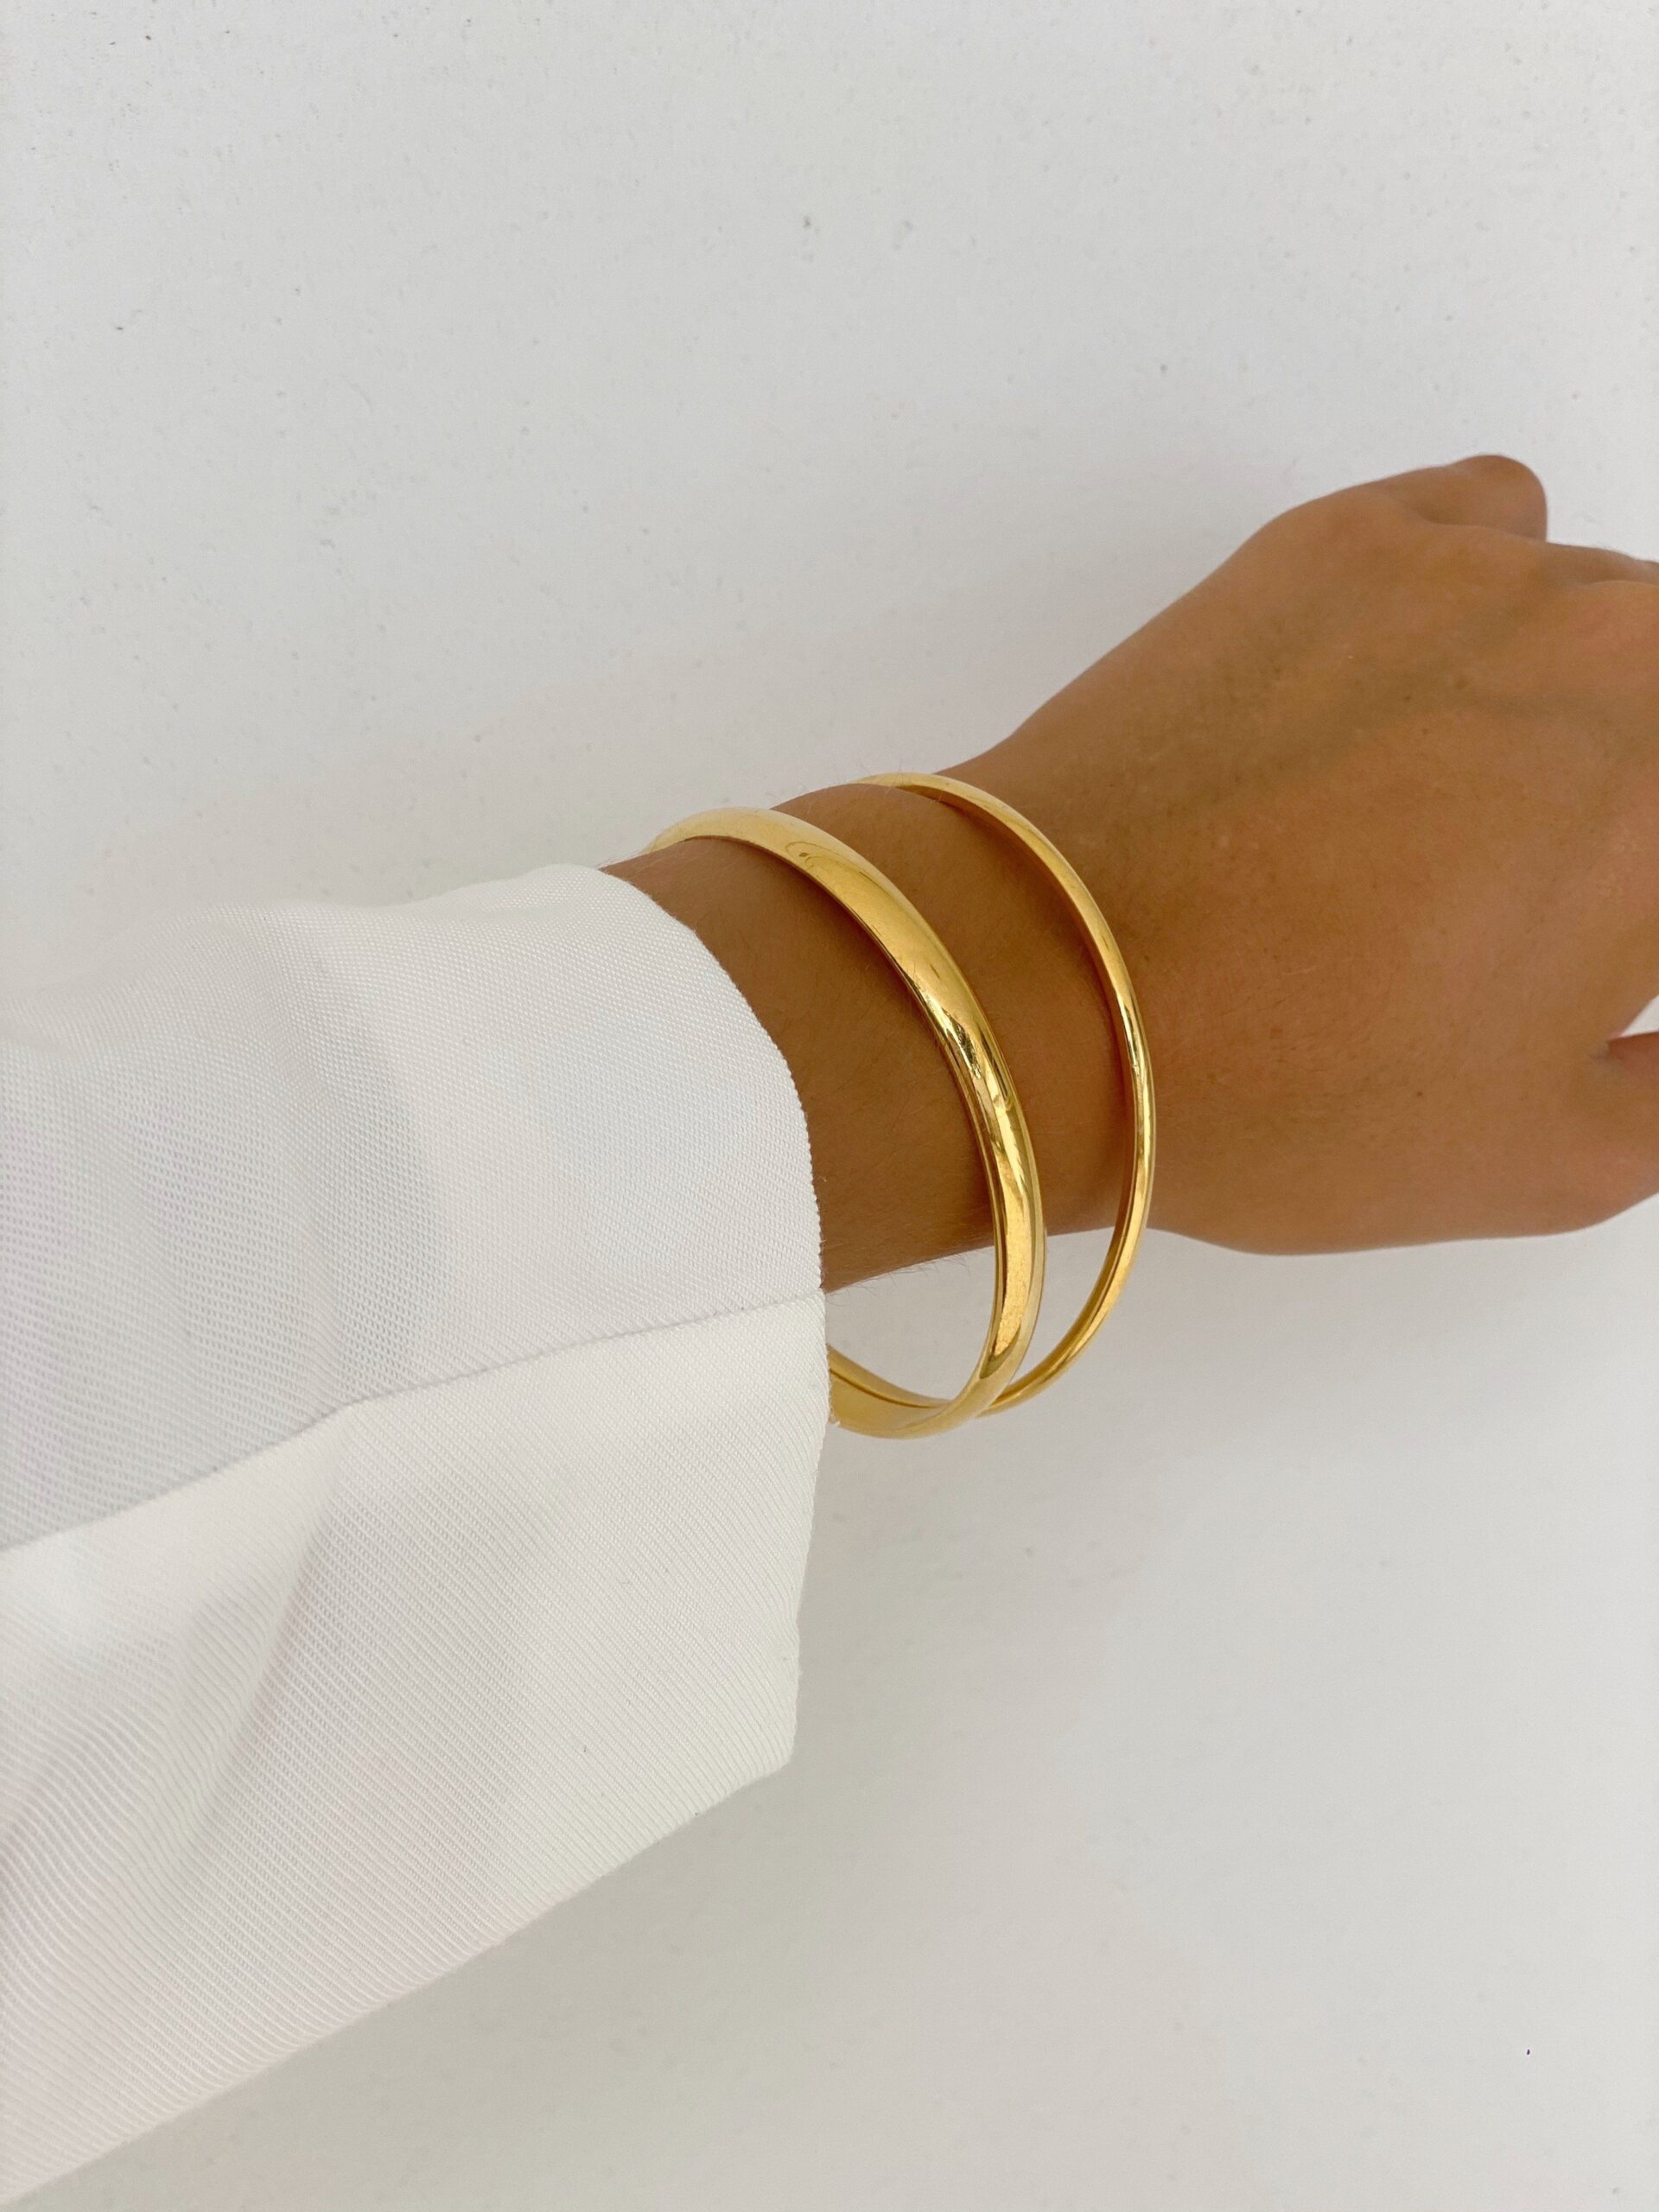 The Timeless Elegance of Gold Bangles: A
Must-Have Accessory